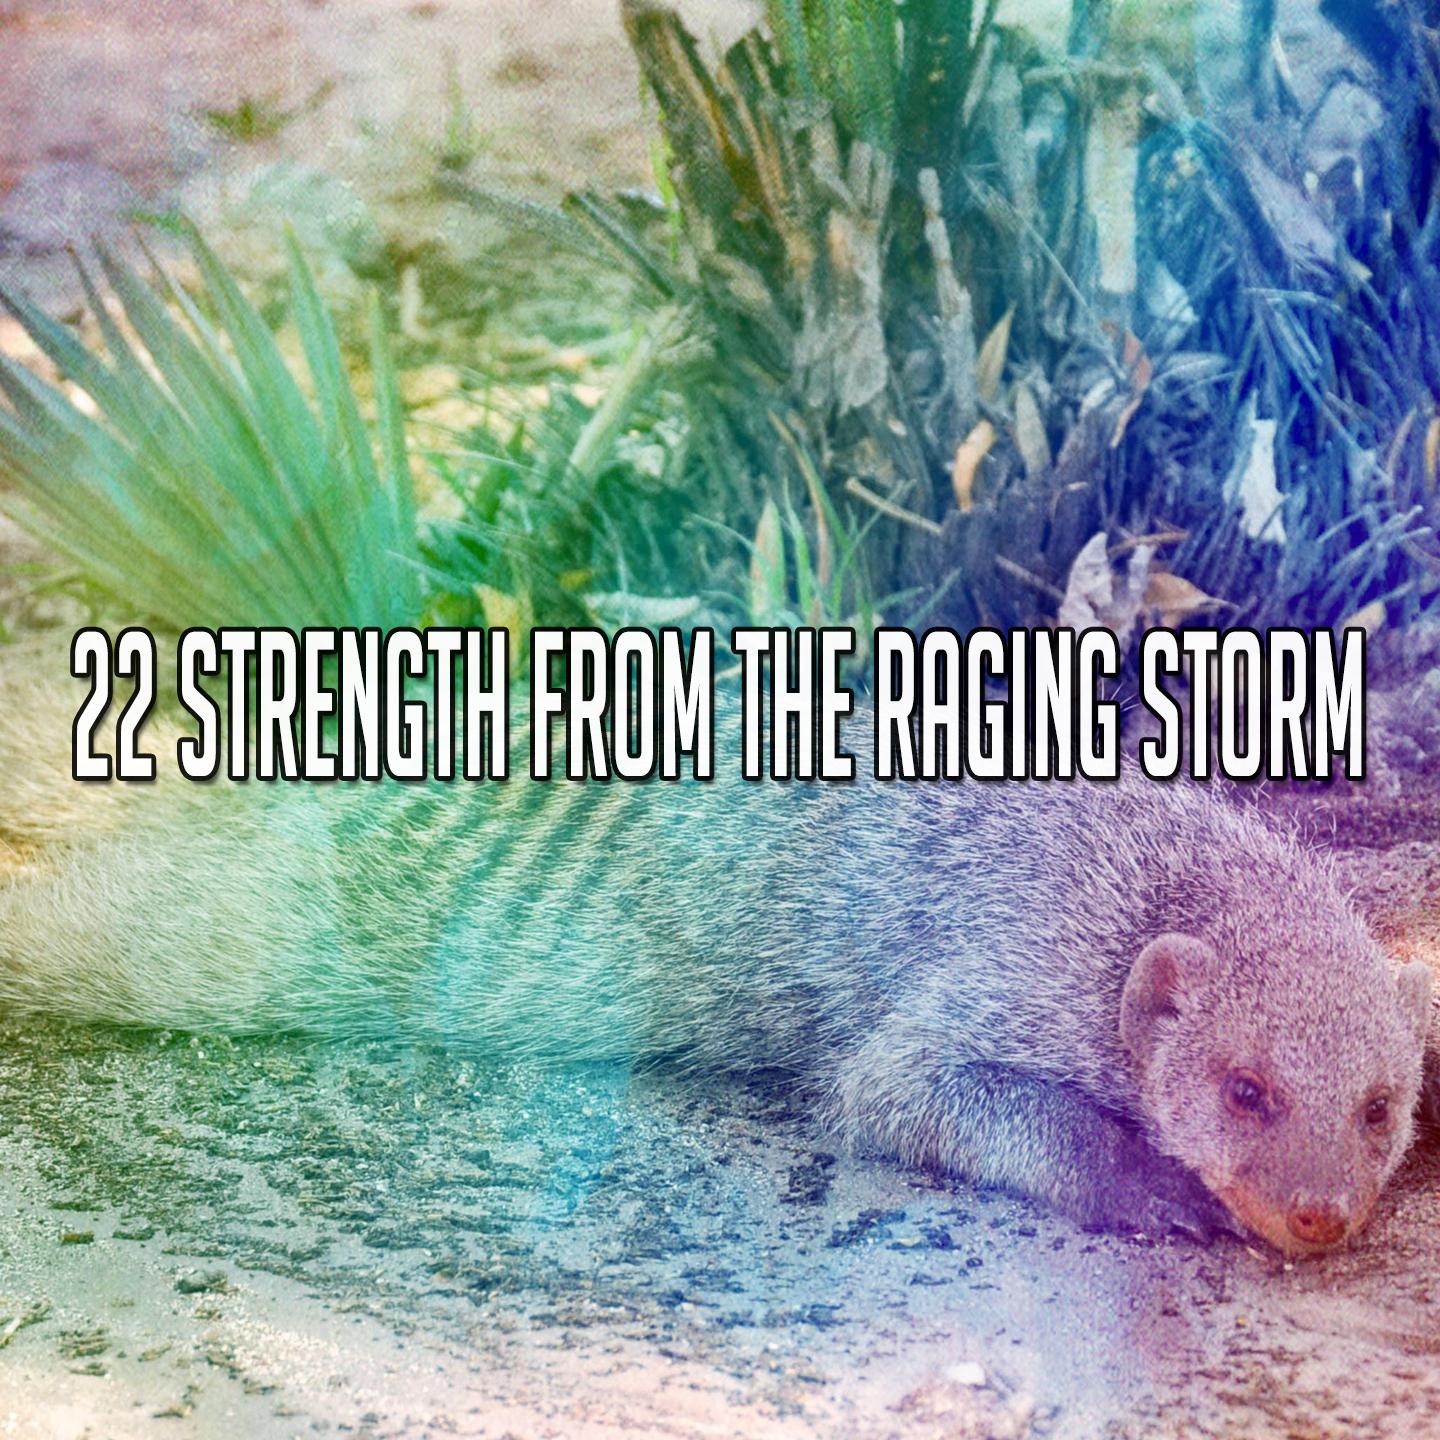 22 Strength from the Raging Storm